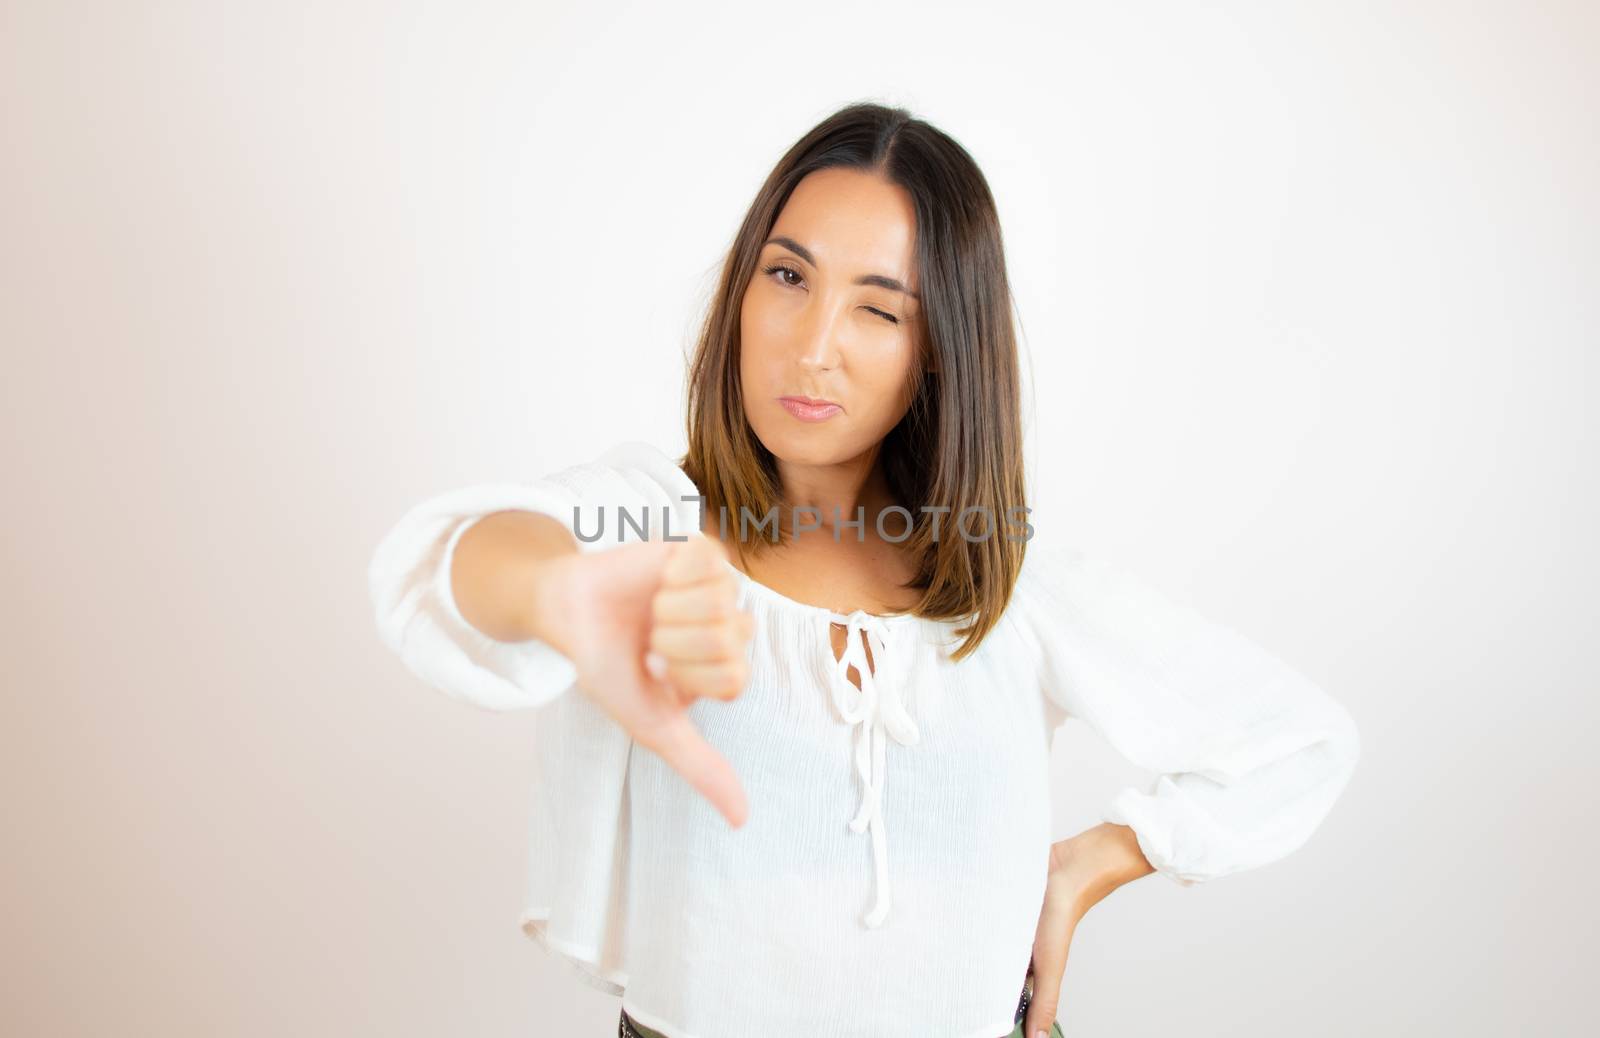 Beautiful young woman in white shirt gesturing